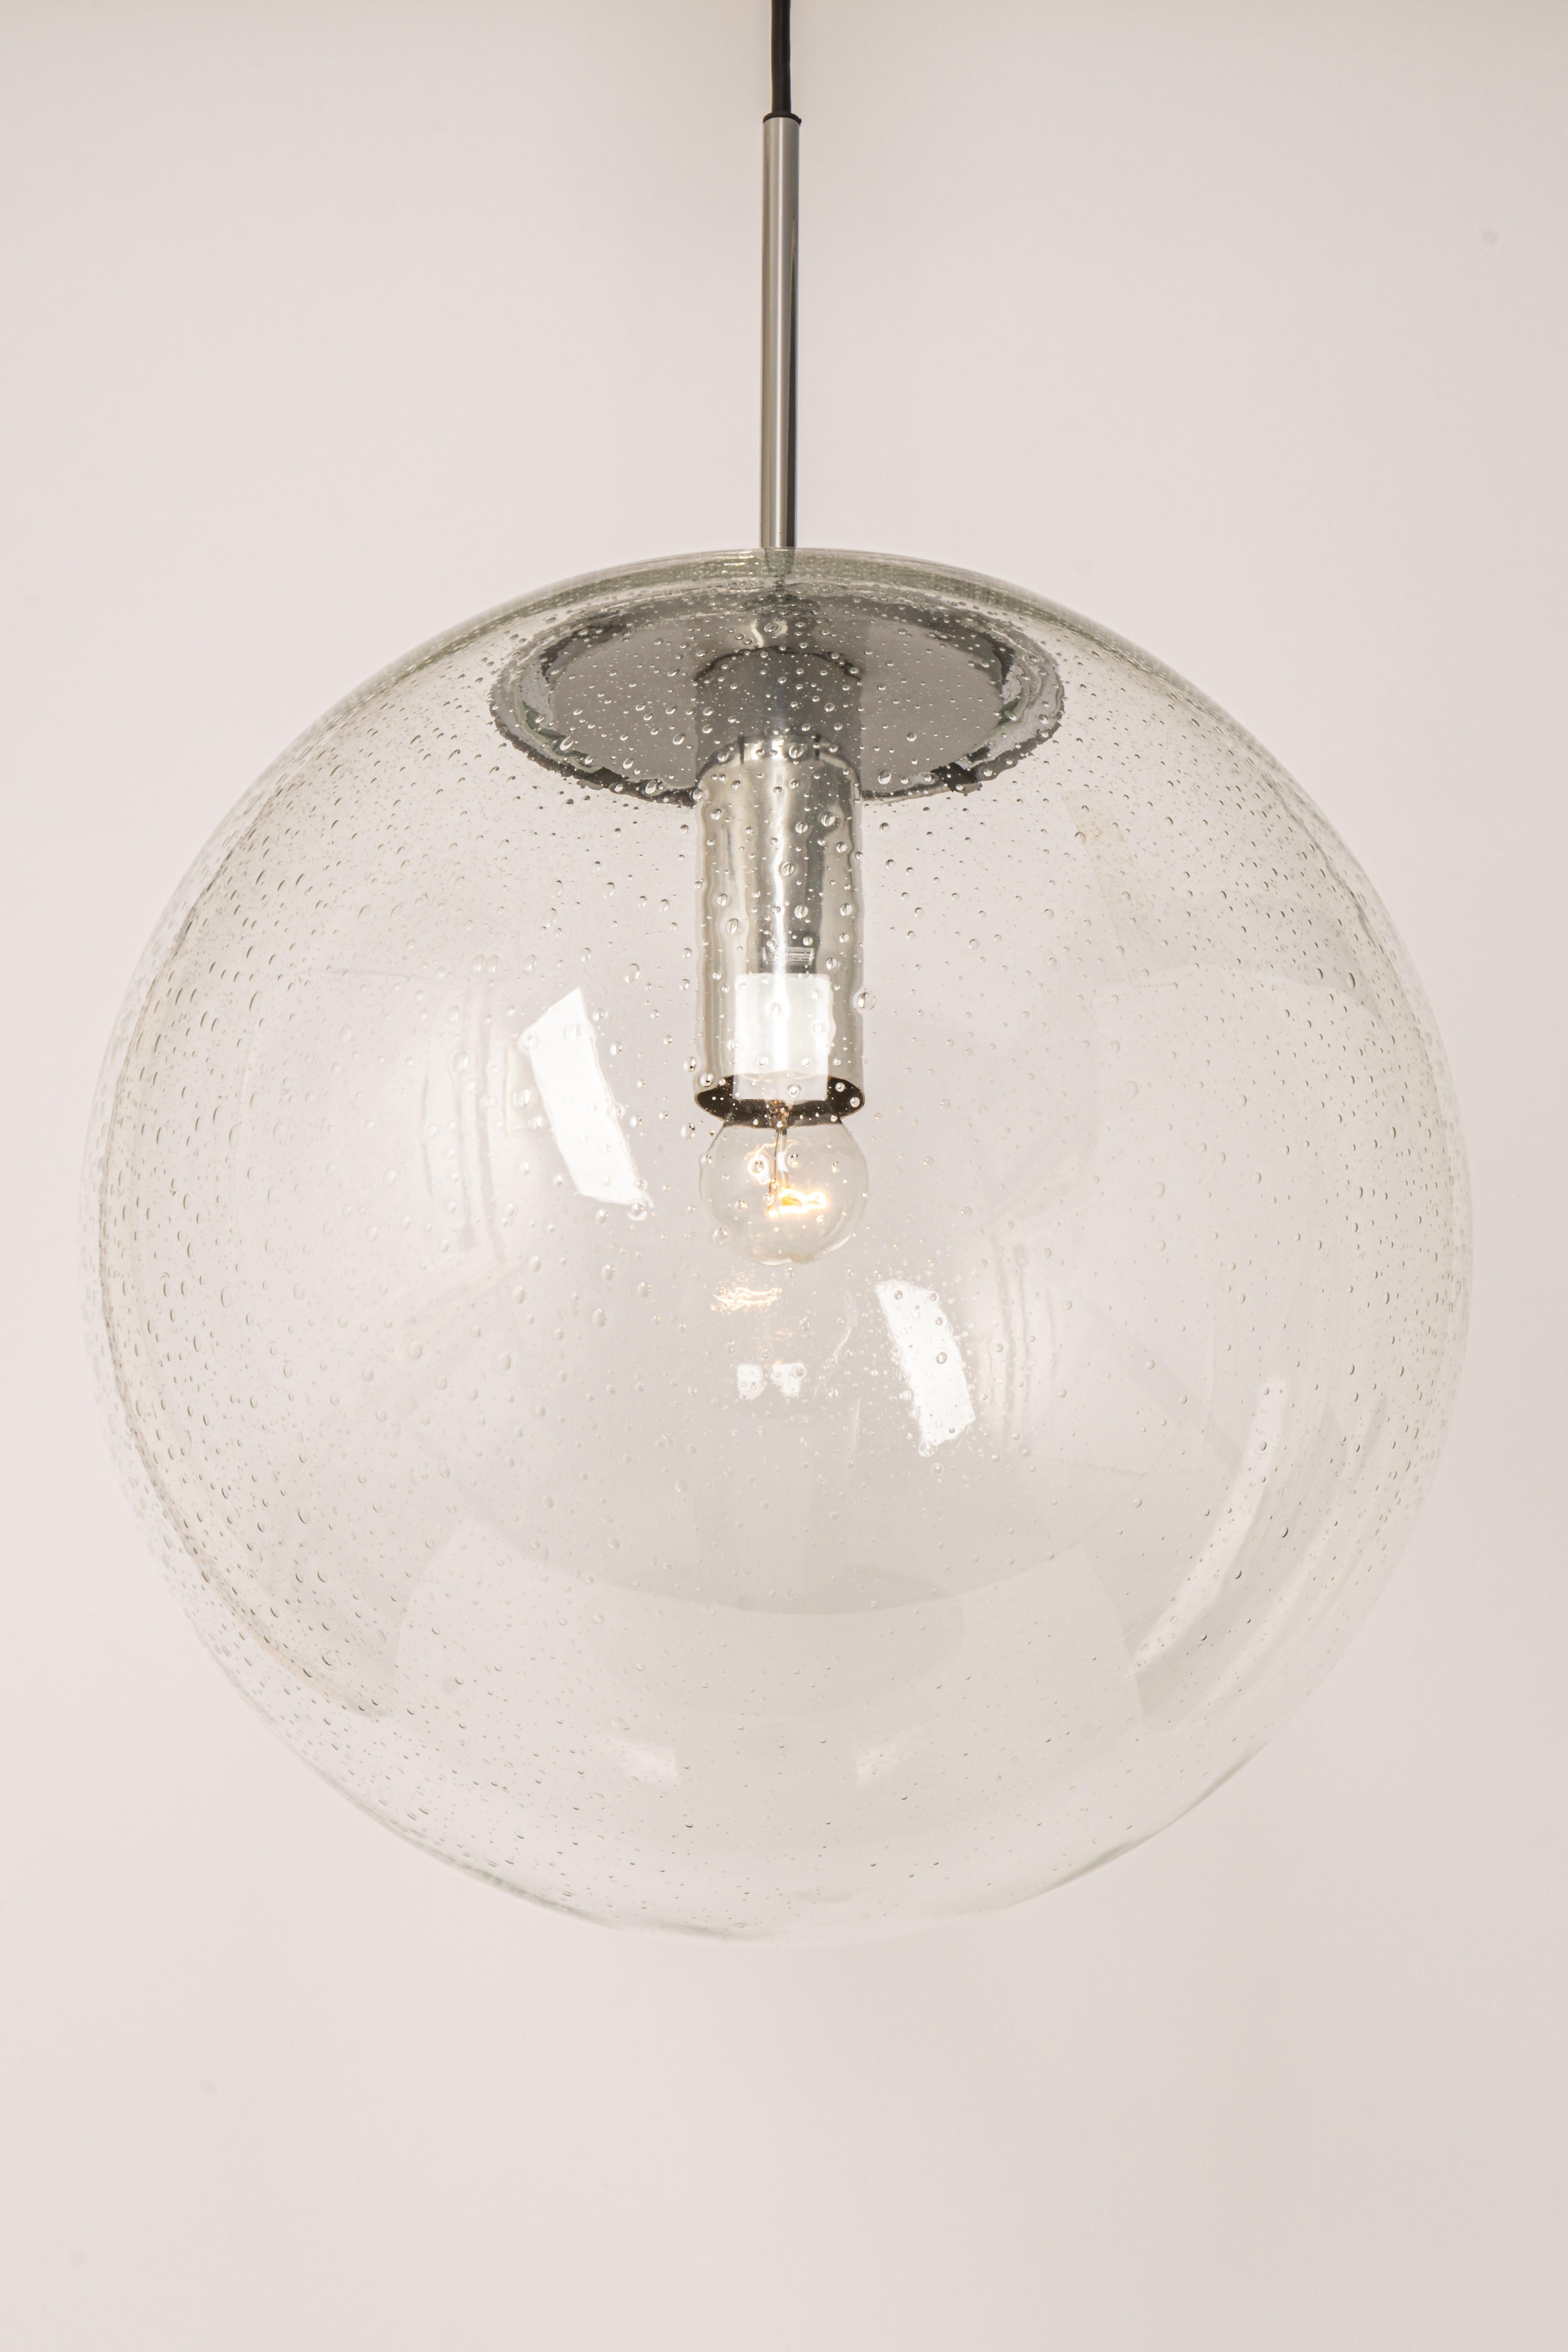 1 of 2 Large Limburg Chrome with Clear Glass Ball Pendant, Germany, 1970s For Sale 2